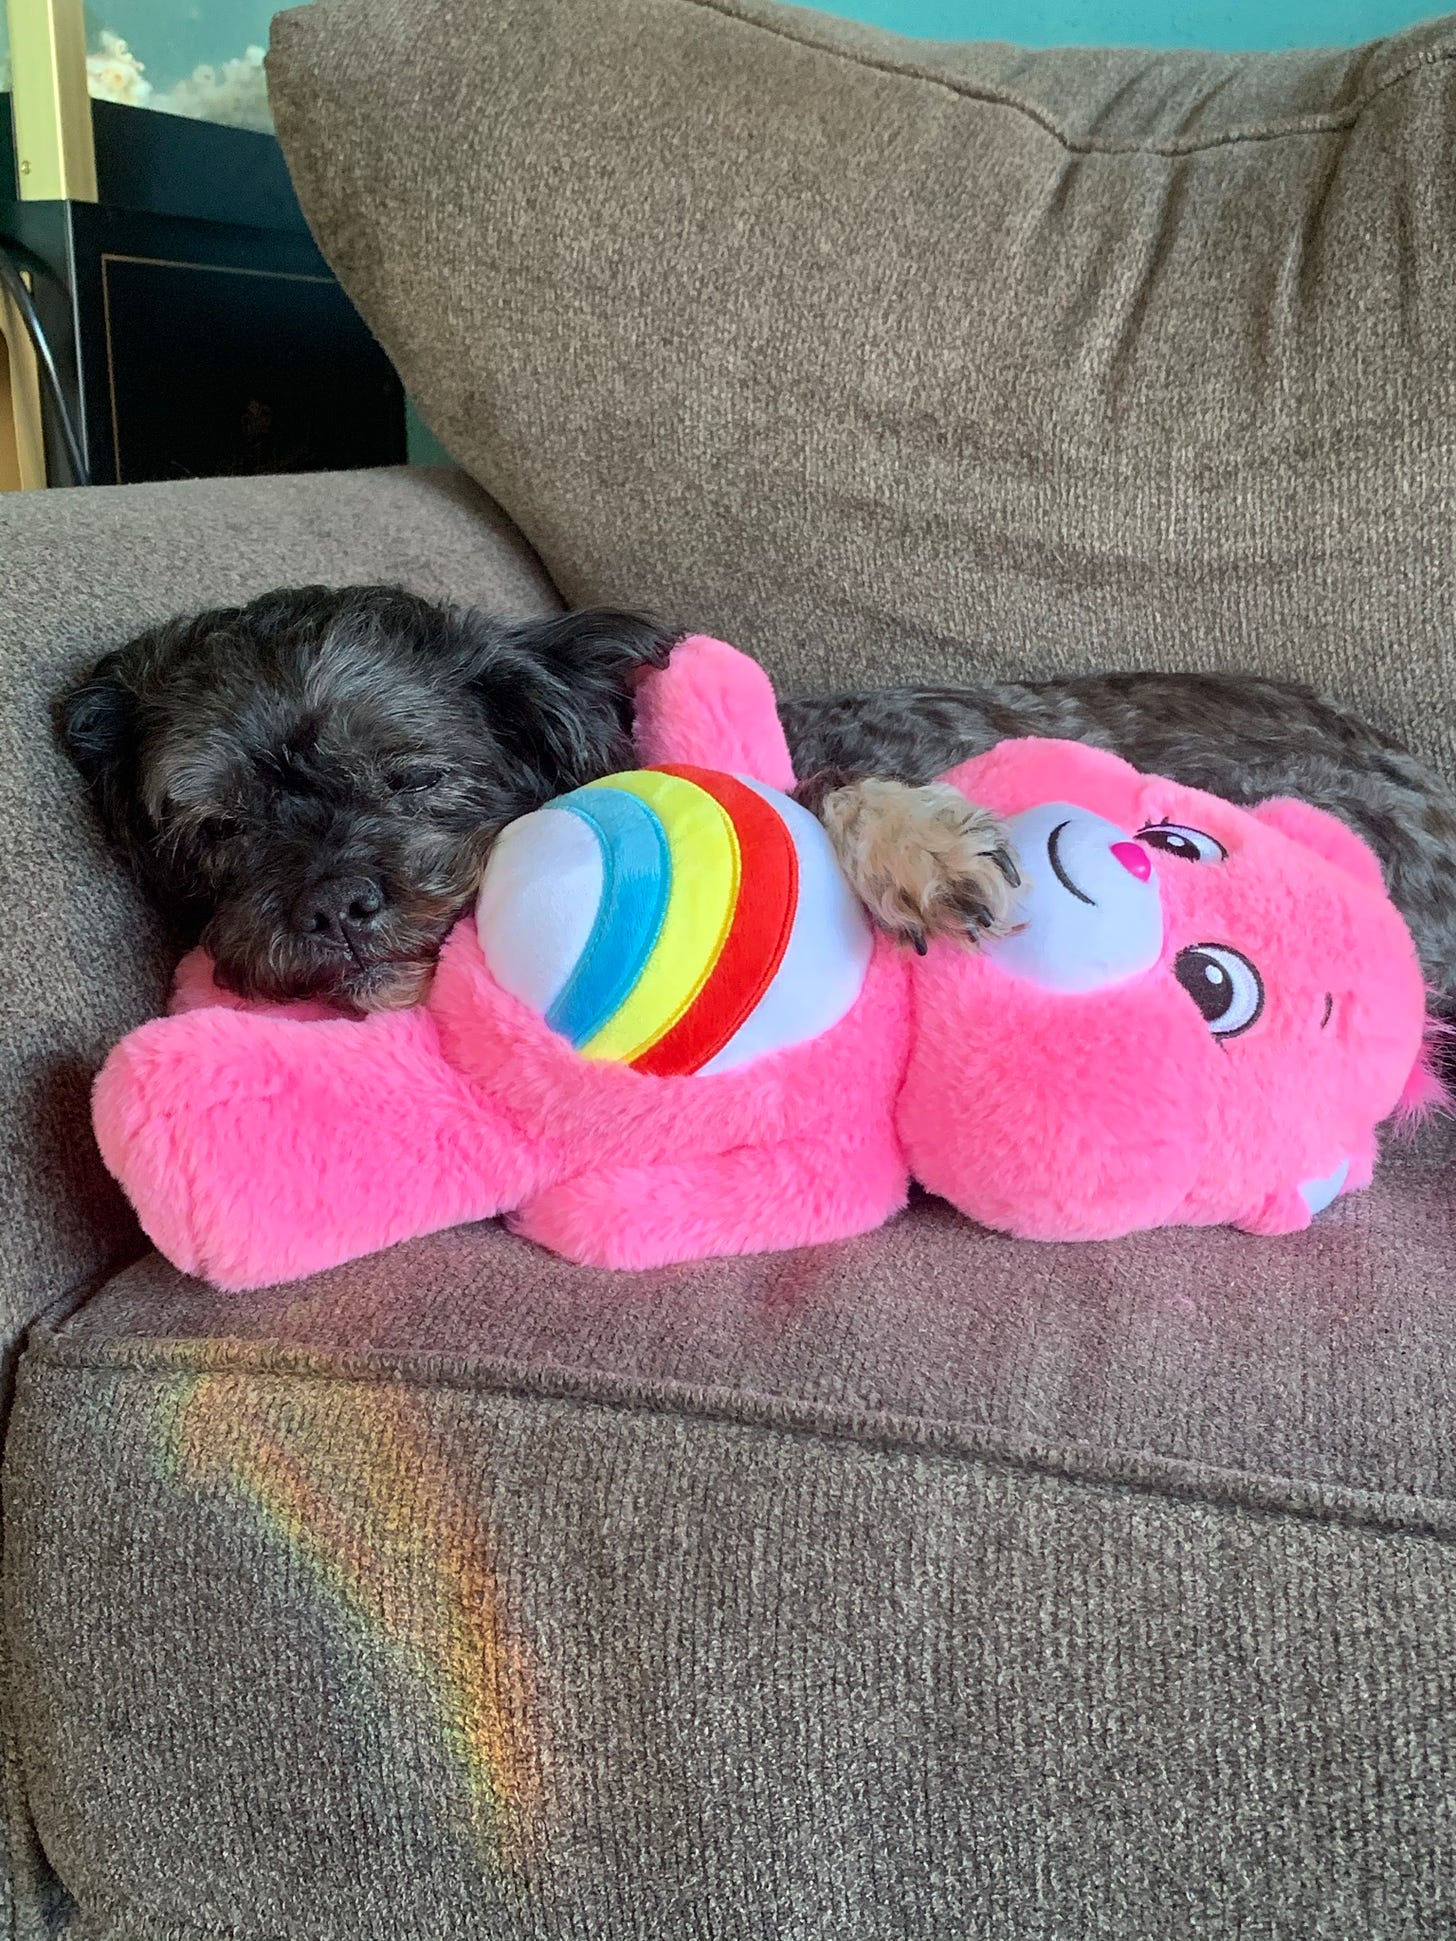 The same small dog is asleep on the grey couch. He has his paw and face resting on a pink care bear with a rainbow on her stomach.